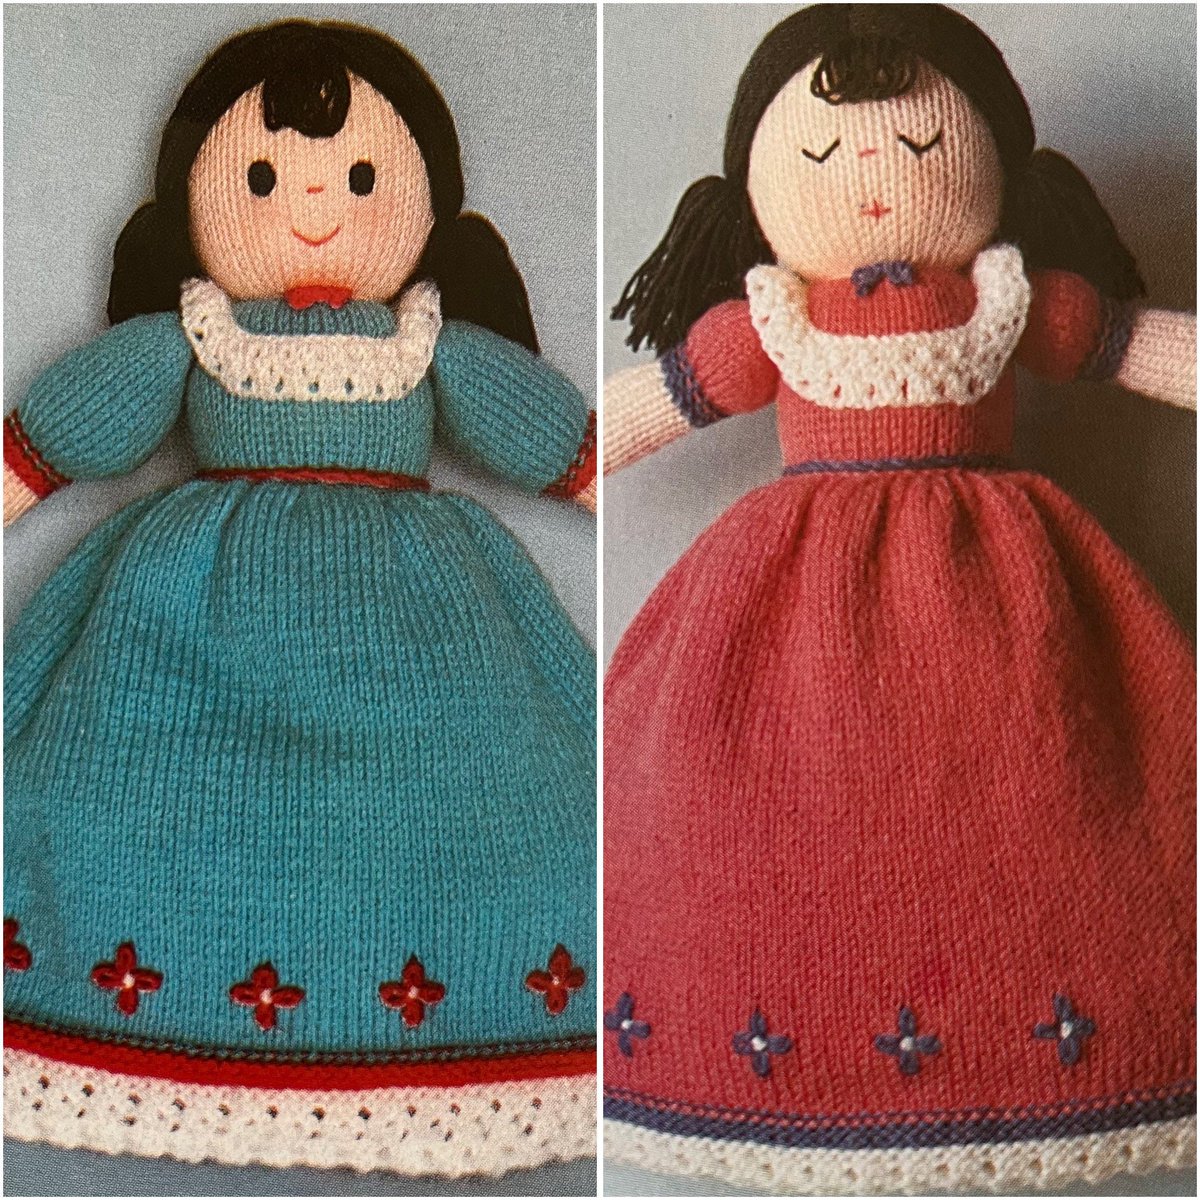 Topsy Turvy Dolly Knitted Reversible Knitted Doll Pattern etsy.me/3MXJwXU #embroidery #dolly #knitteddoll #knitting #knittingpattern #dolls #reversable #knittedtoy #yarntoy #MHHSBD